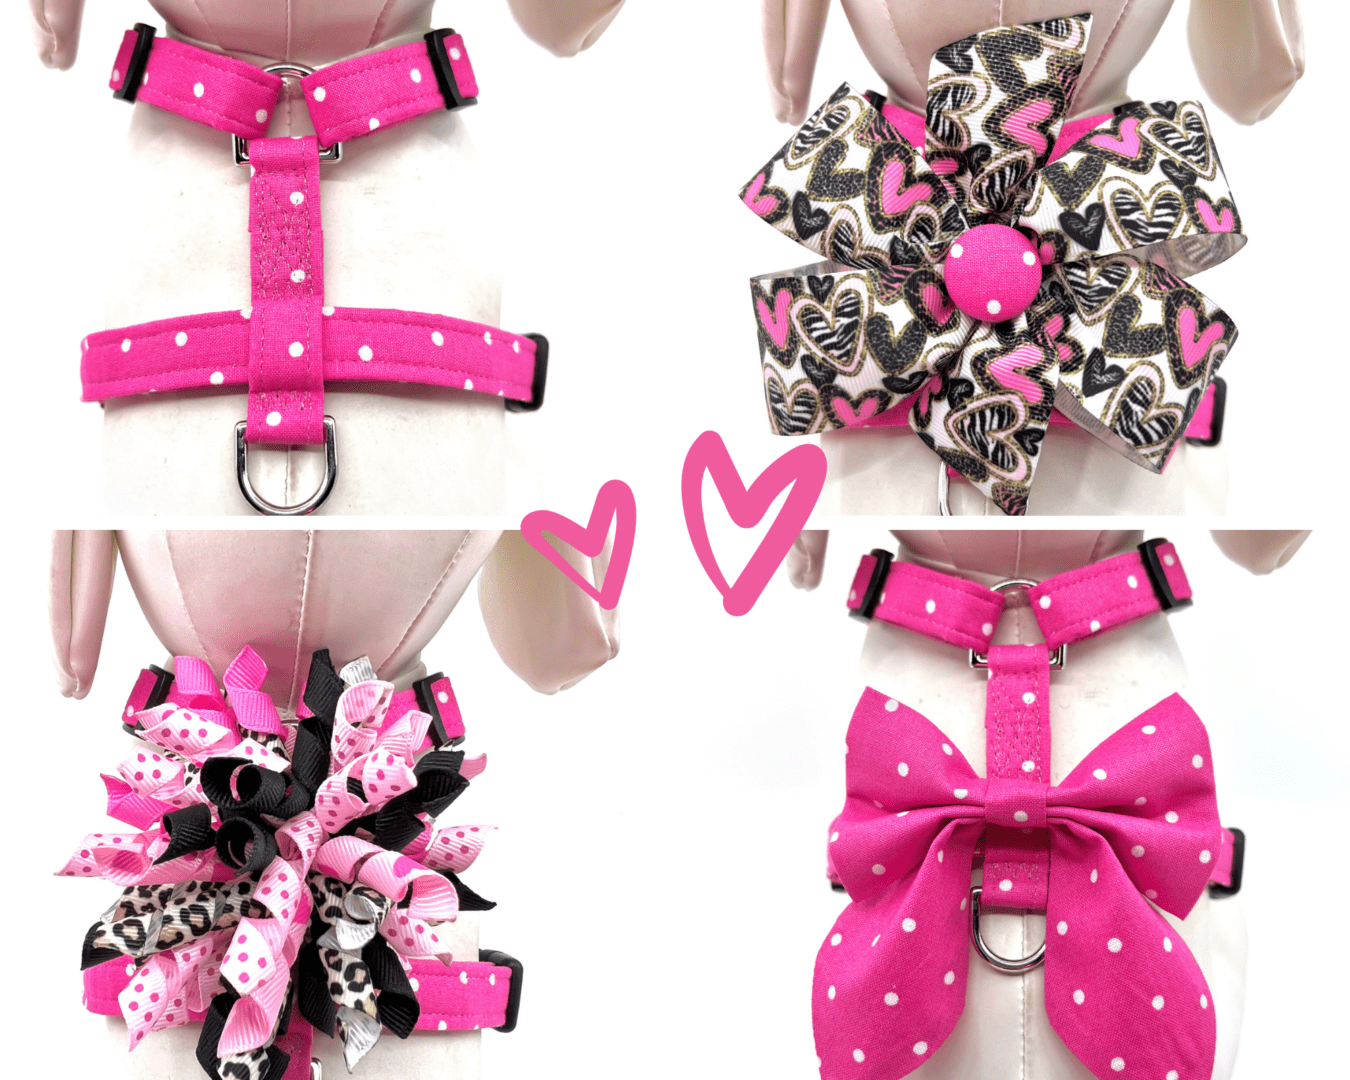 A dog harness with pink bows and polka dots.